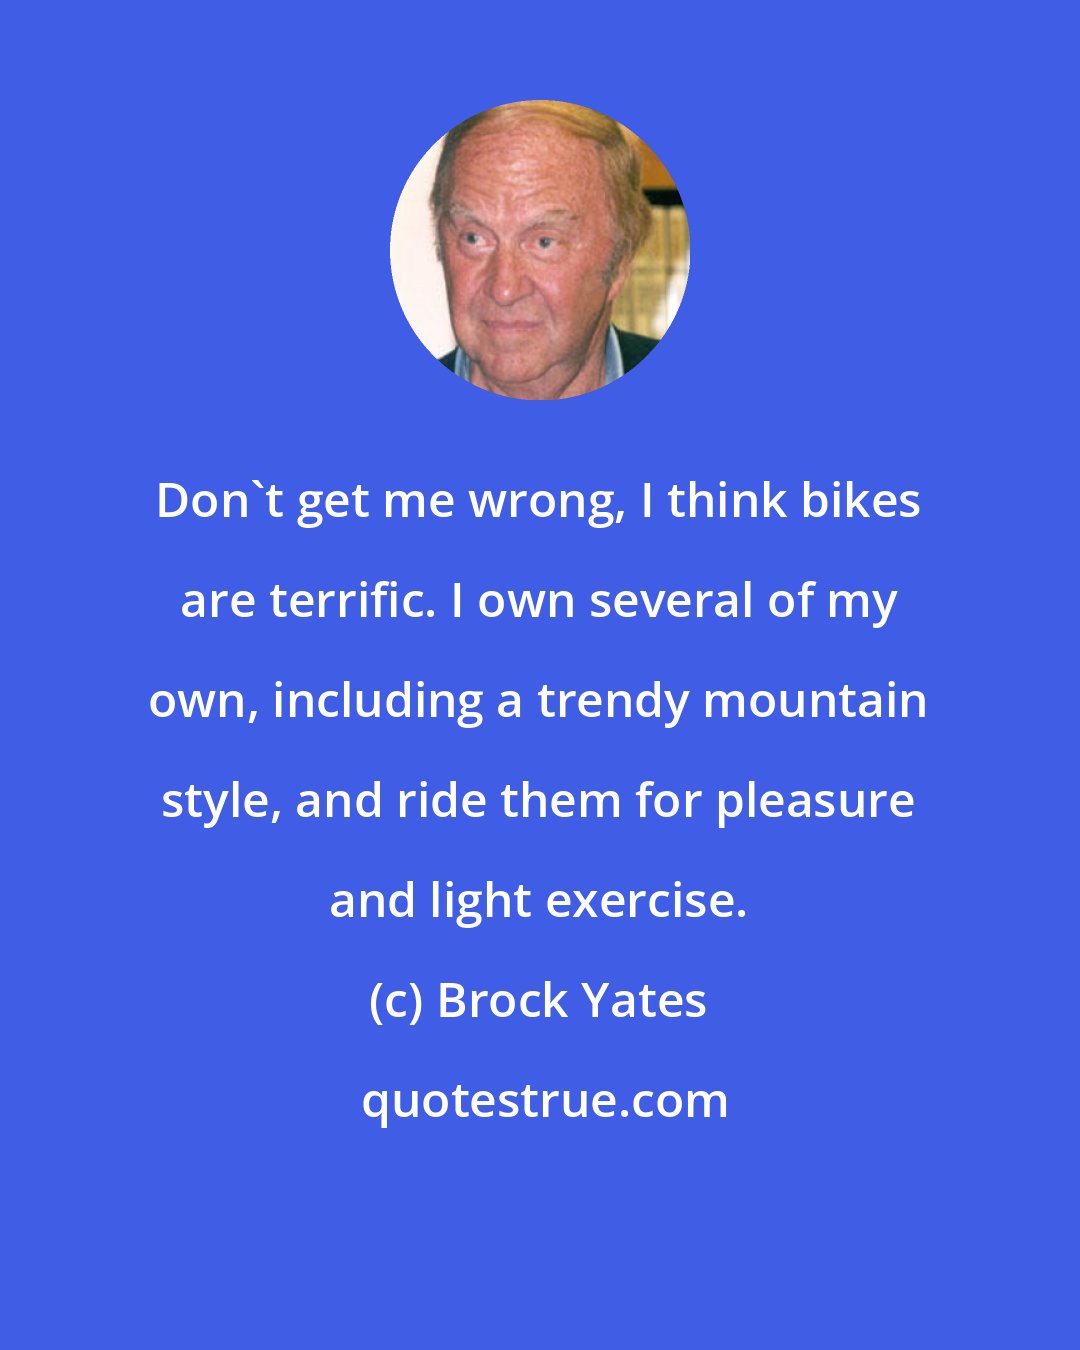 Brock Yates: Don't get me wrong, I think bikes are terrific. I own several of my own, including a trendy mountain style, and ride them for pleasure and light exercise.